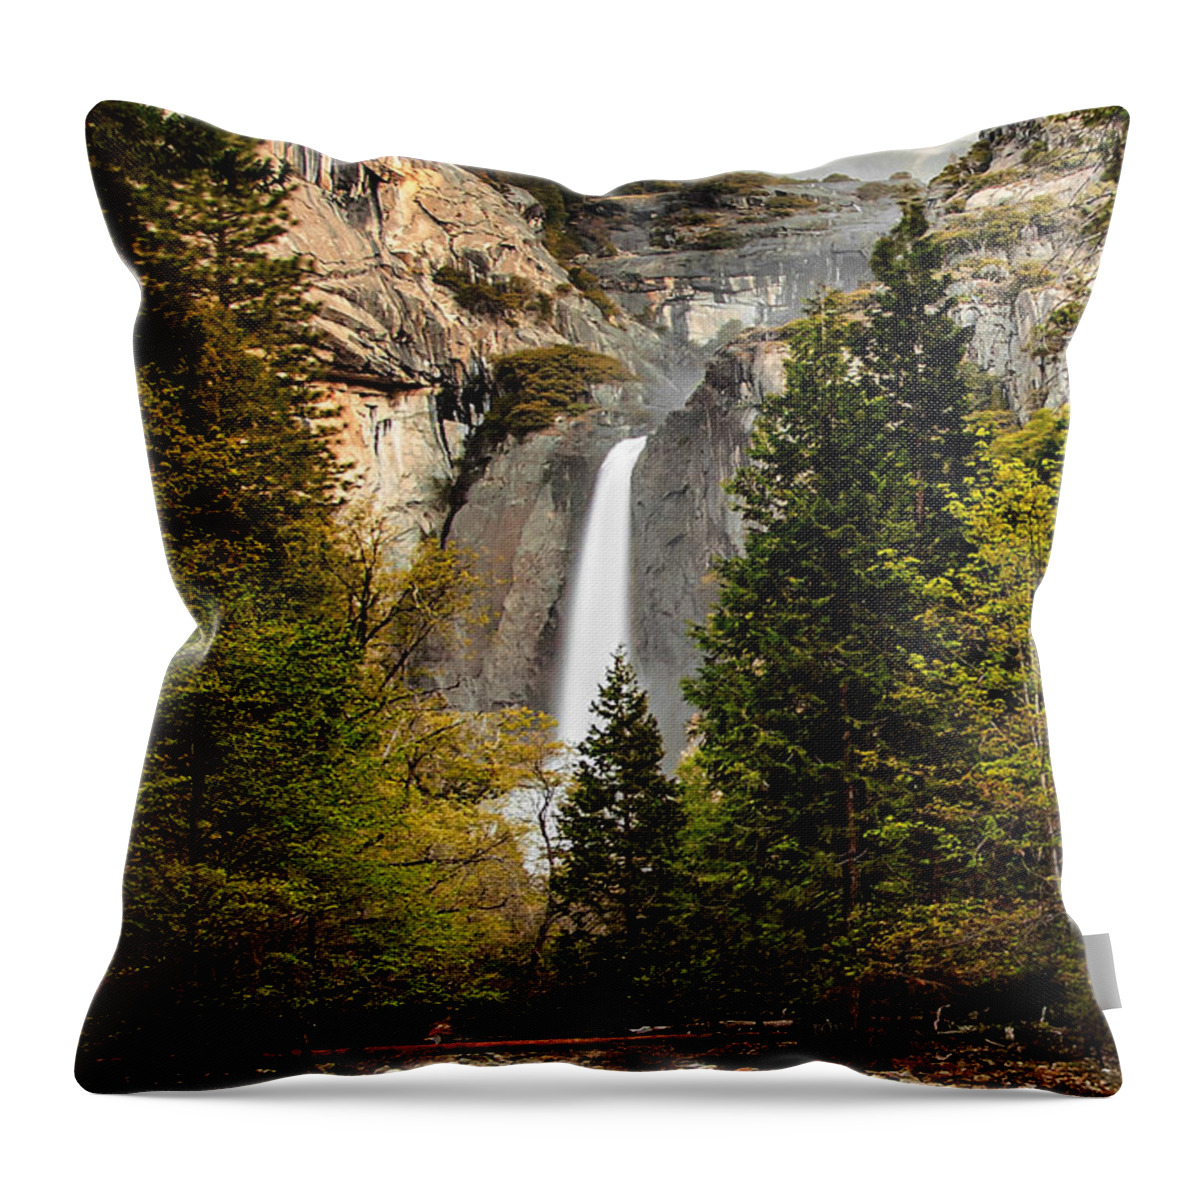 Yosemite National Park Throw Pillow featuring the photograph Morning Delight by Az Jackson